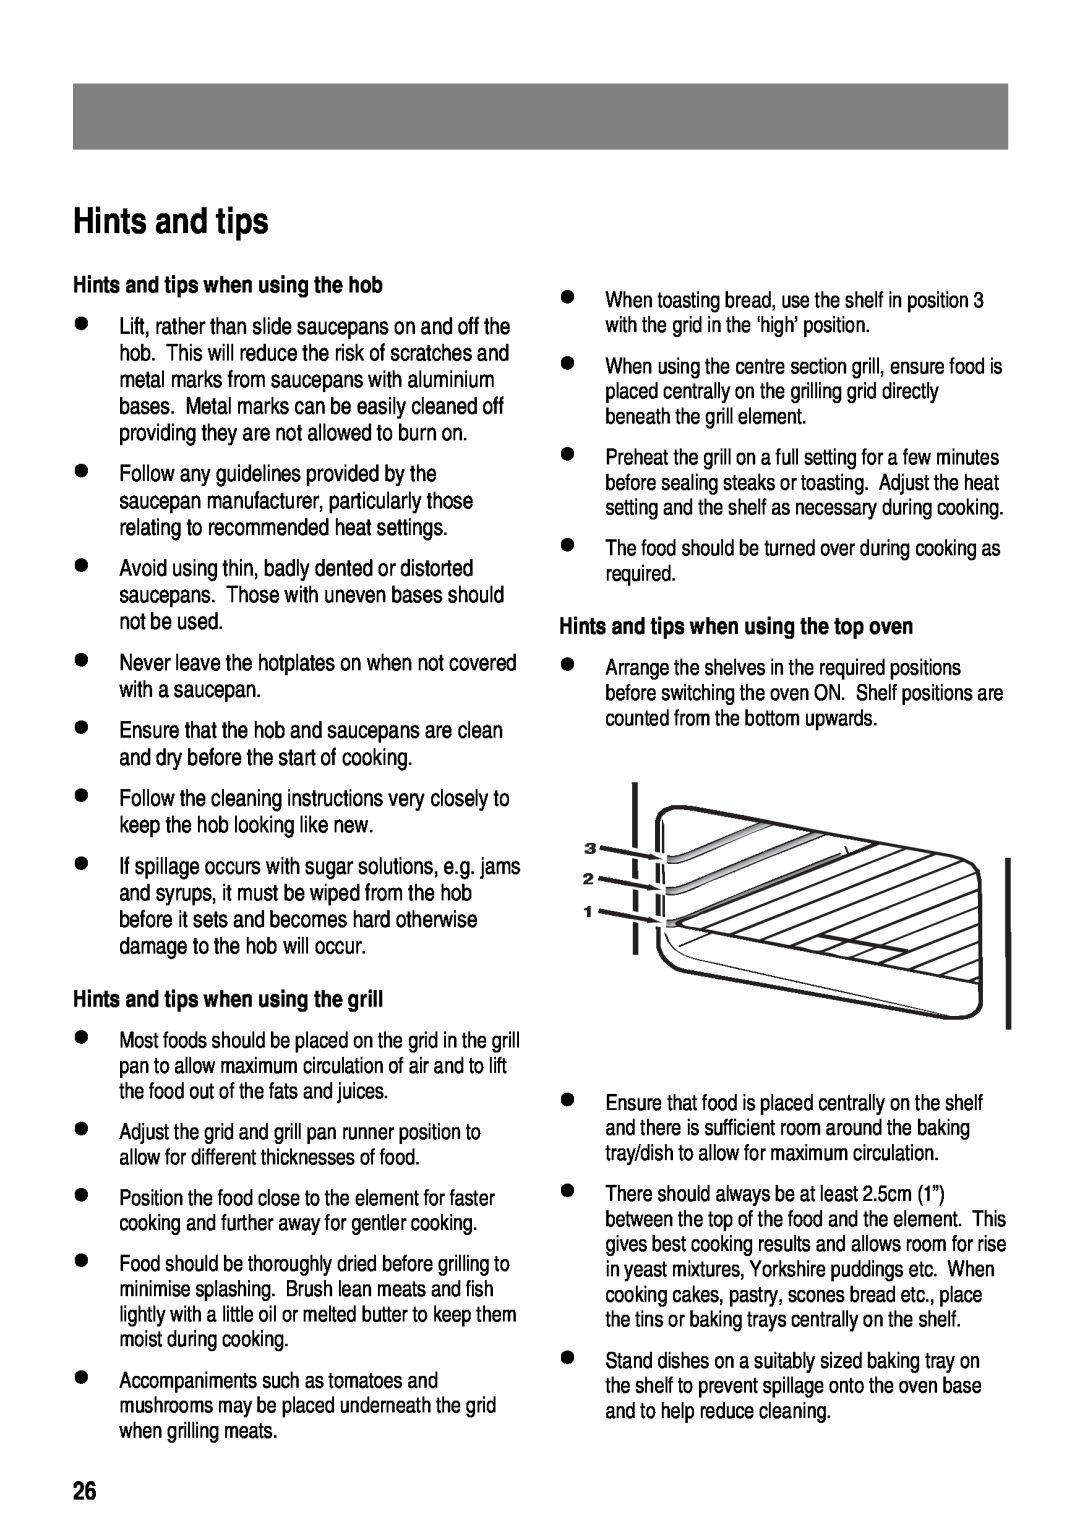 Zanussi ZKT6050 user manual Hints and tips when using the hob, Hints and tips when using the grill 